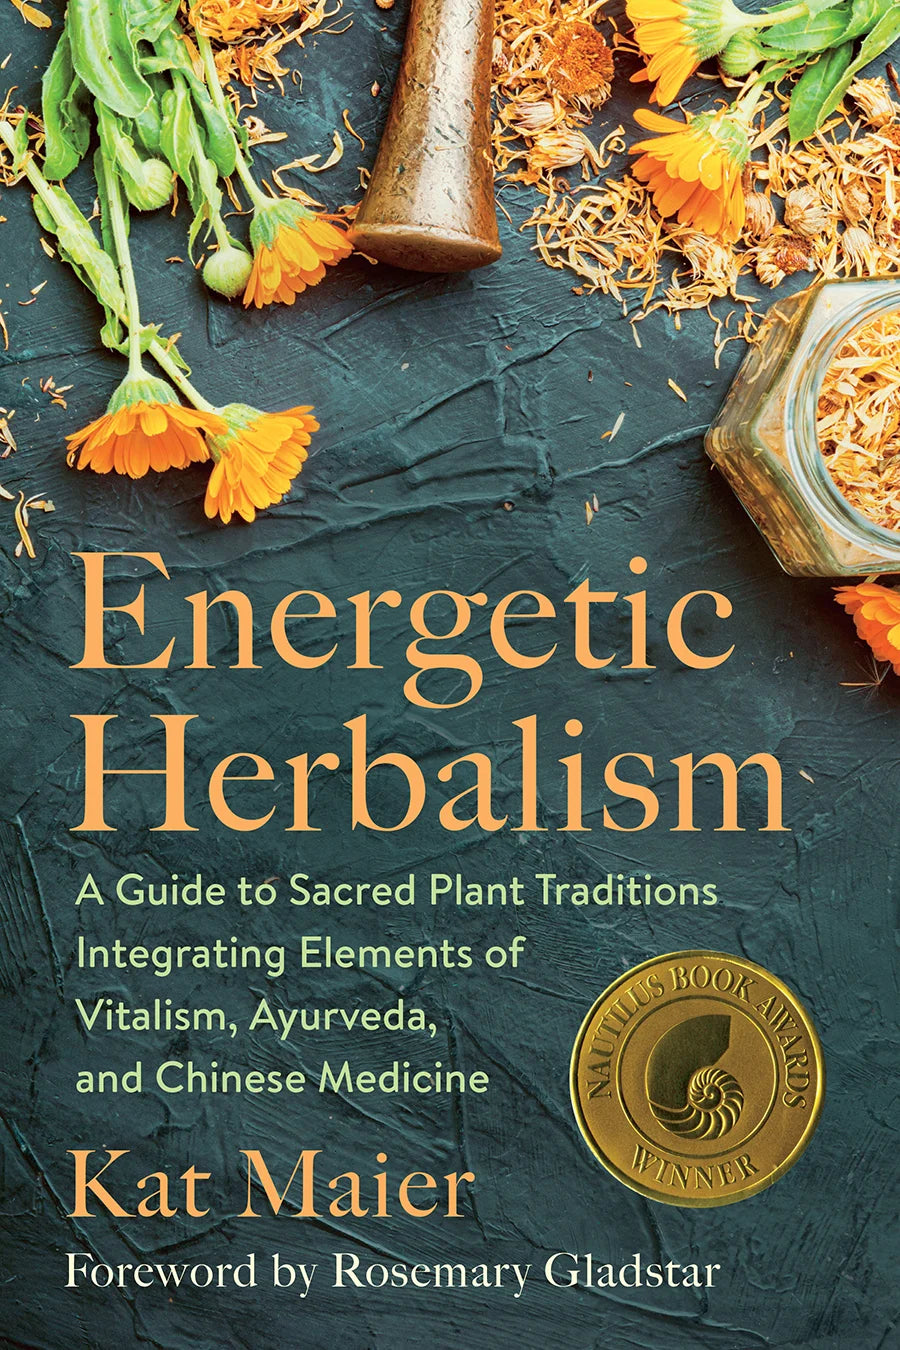 Energetic Herbalism: A Guide to Sacred Plant Traditions Integrating Elements of Vitalism, Ayurveda, and Chinese Medicine by Kat Maier - The Josephine Porter Institute